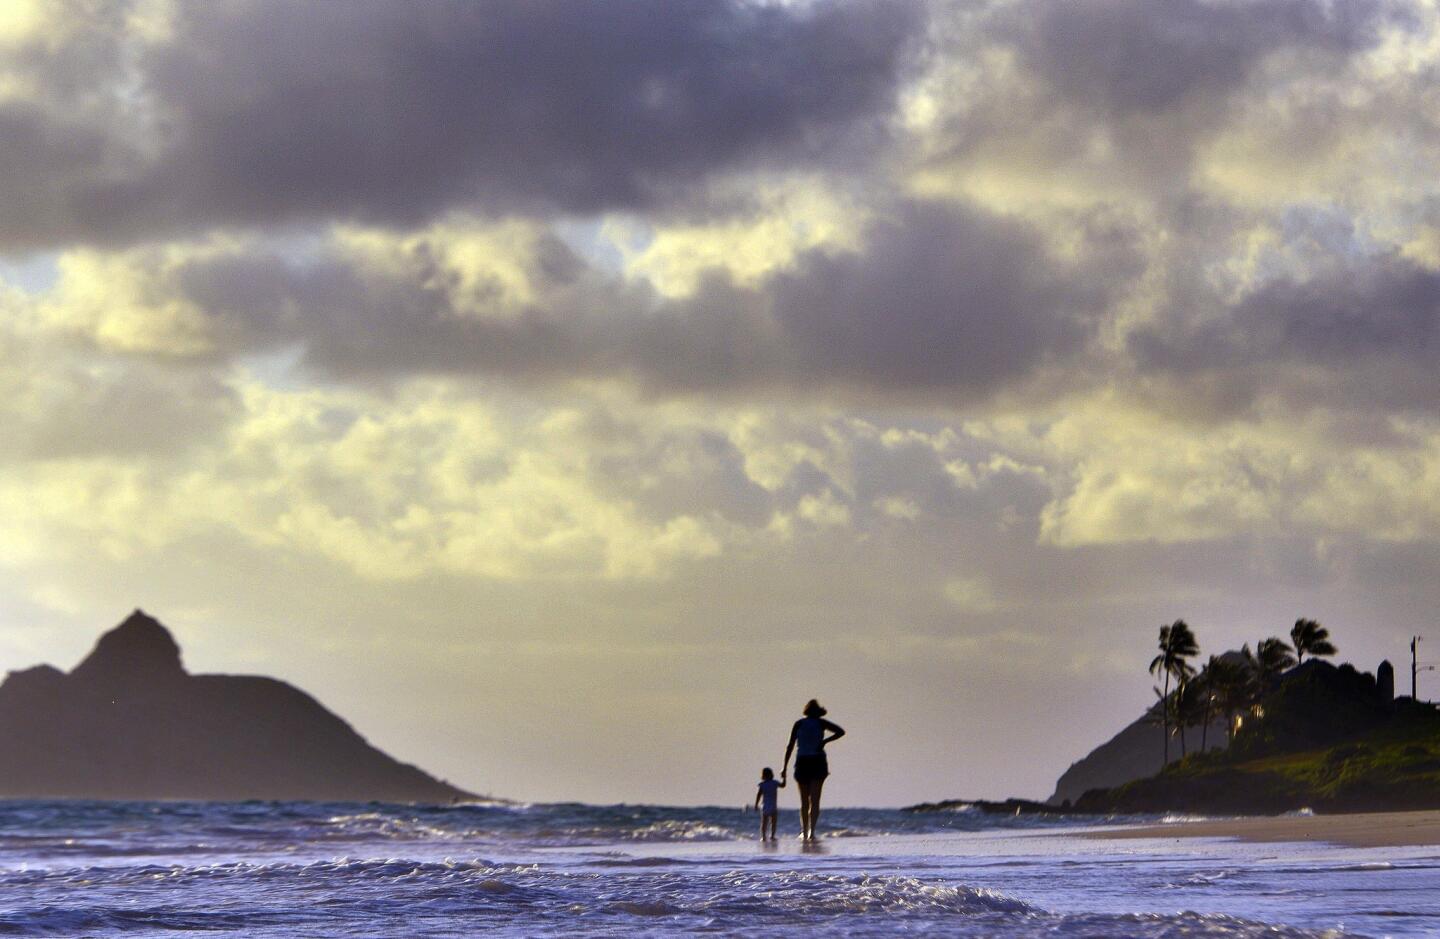 Anne Kllingshirn of Kailua, Hawaii, walks with her daughter Emma, 1, as storm clouds float overhead during the sunrise hours on Kailua Beach Thursday morning.